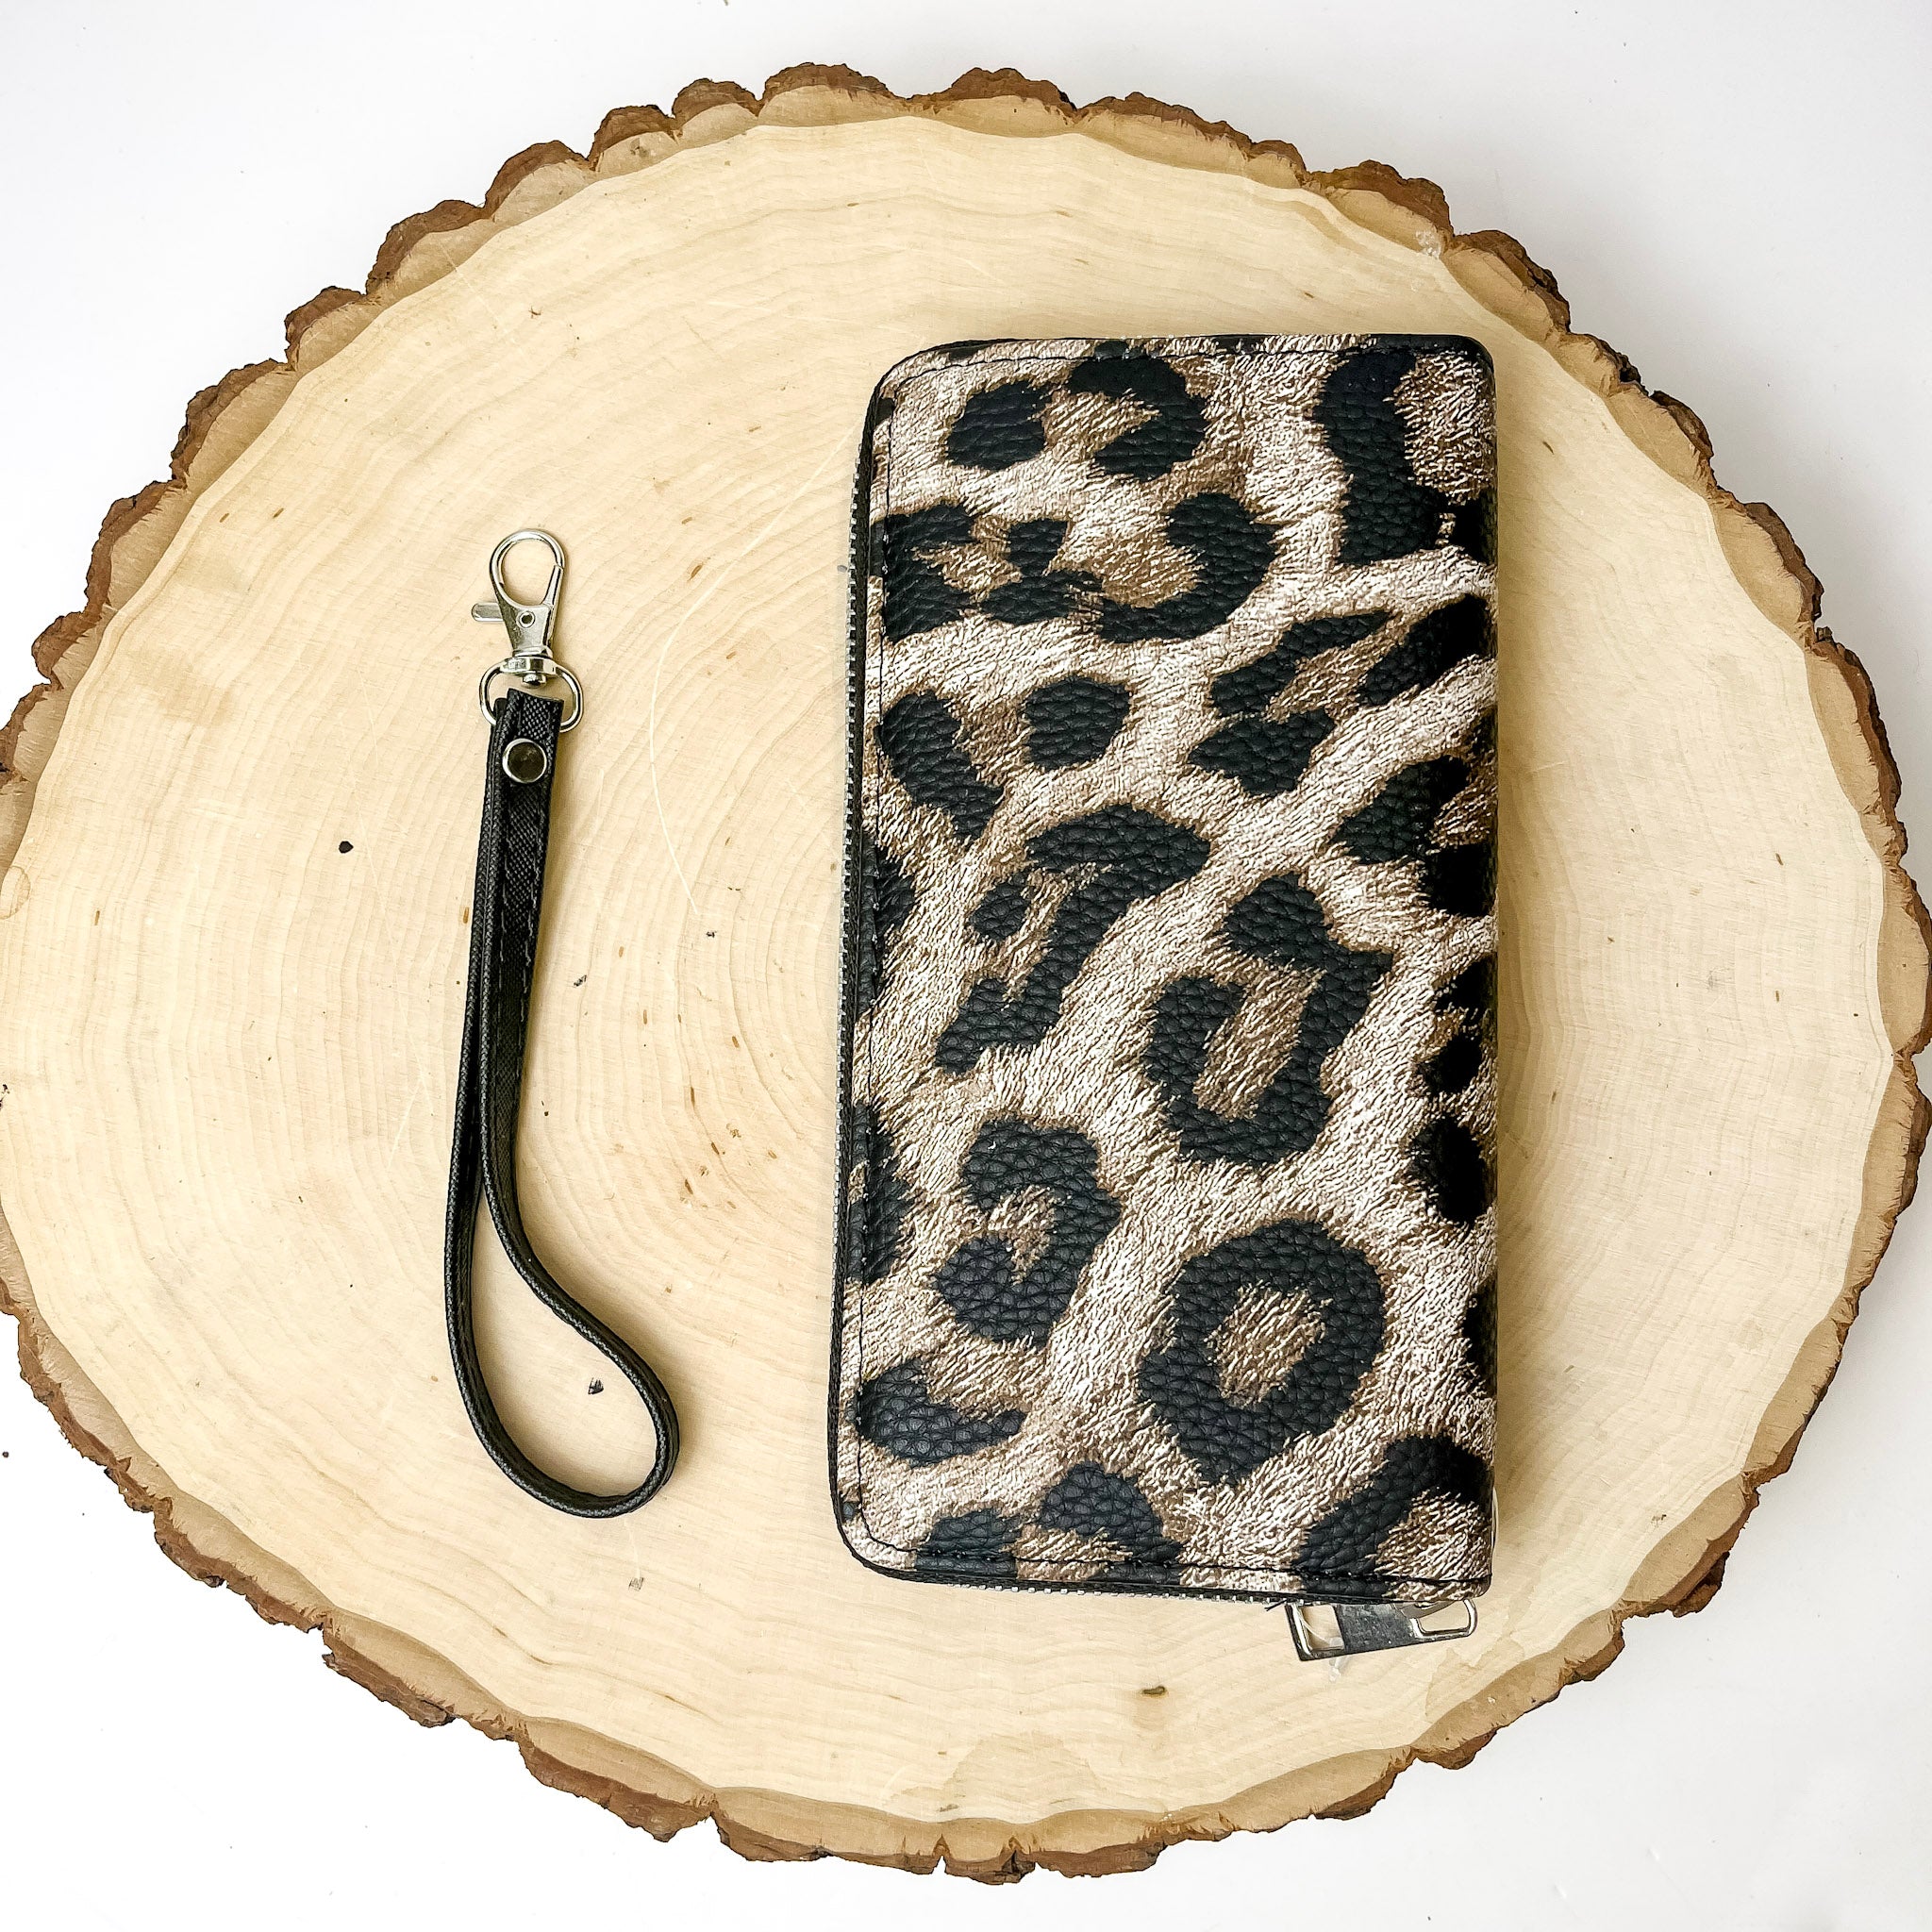 Animal Print Zip Up Wallet - Giddy Up Glamour Boutique